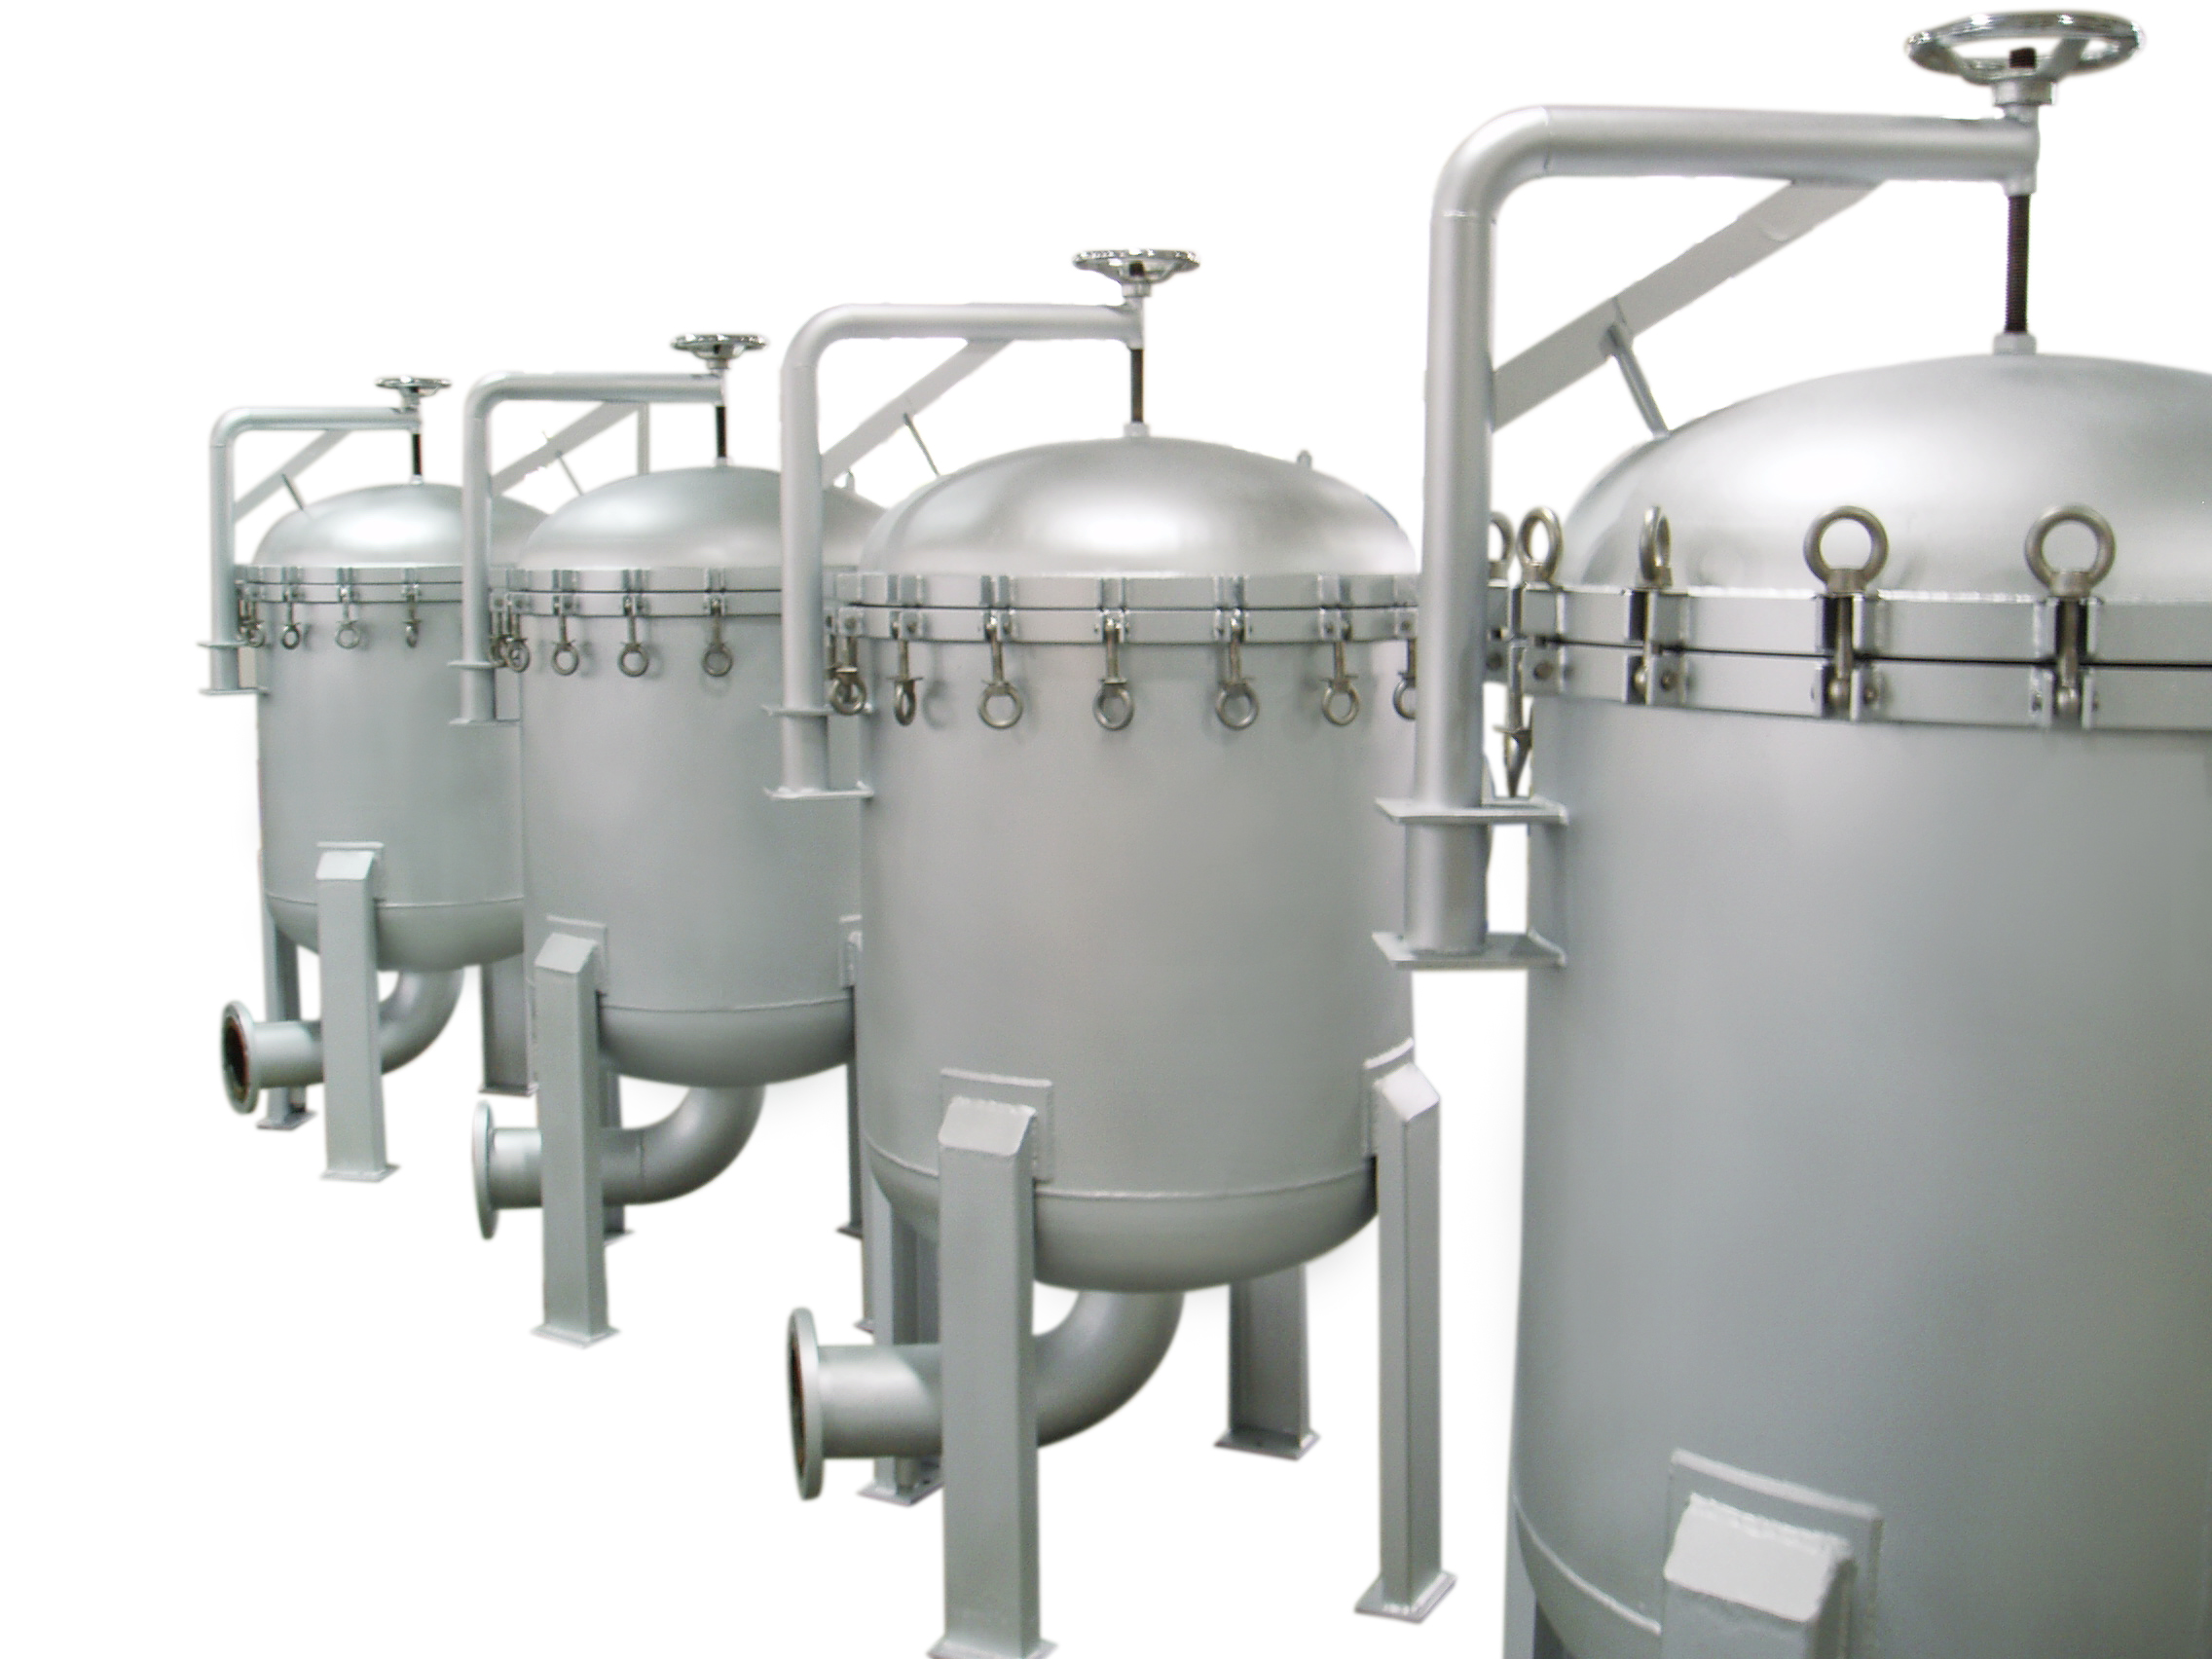 Industry stainless steel filter housing